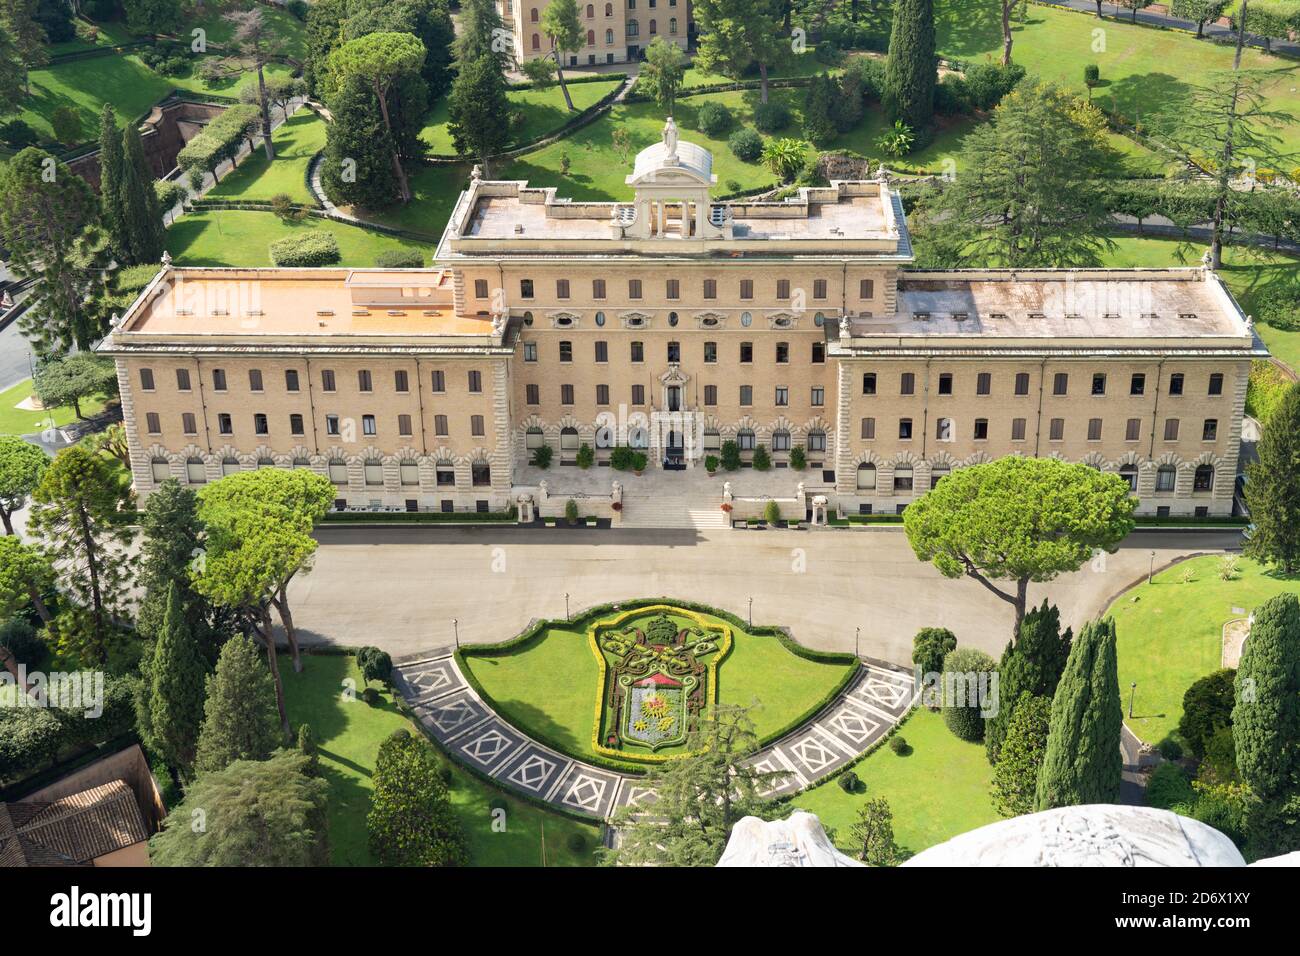 The papal residence in the Vatican in Rome. From a series of travel photos in Italy. Photo date: Wednesday, September 23, 2020. Photo: Roger Garfield/ Stock Photo